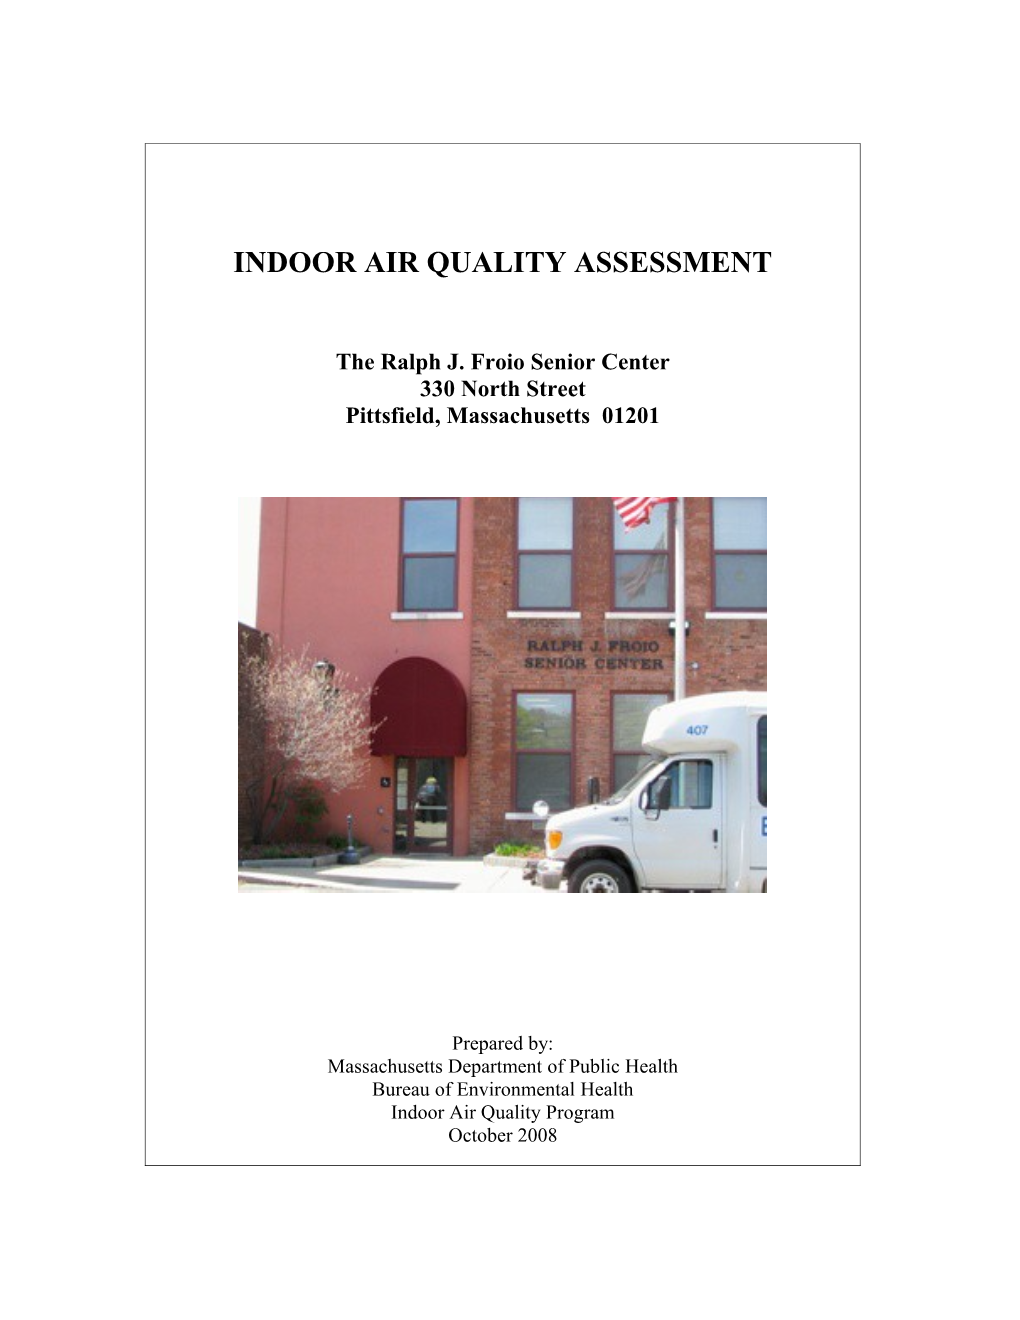 INDOOR AIR QUALITY ASSESSMENT - the Ralph J. Froio Senior Center, 330 North Street, Pittsfield